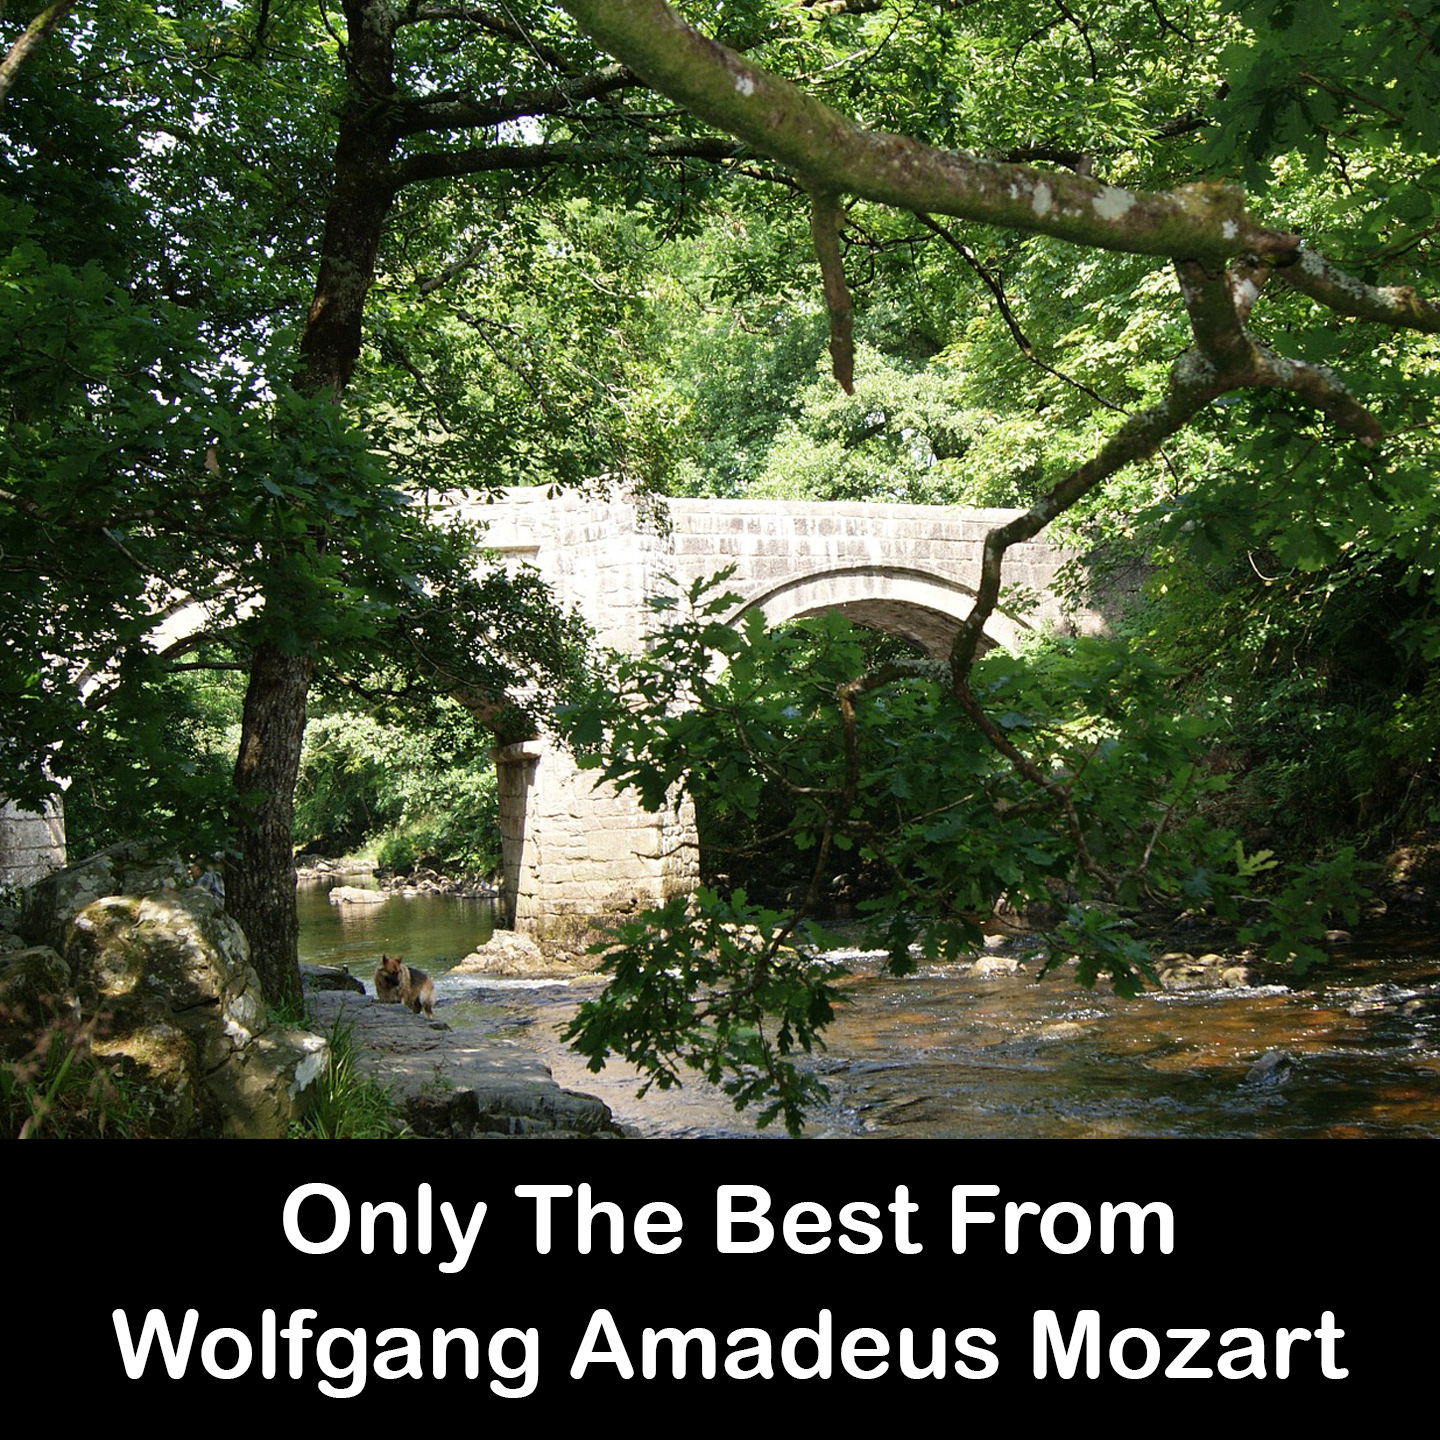 Only The Best From Wolfgang Amadeus Mozart